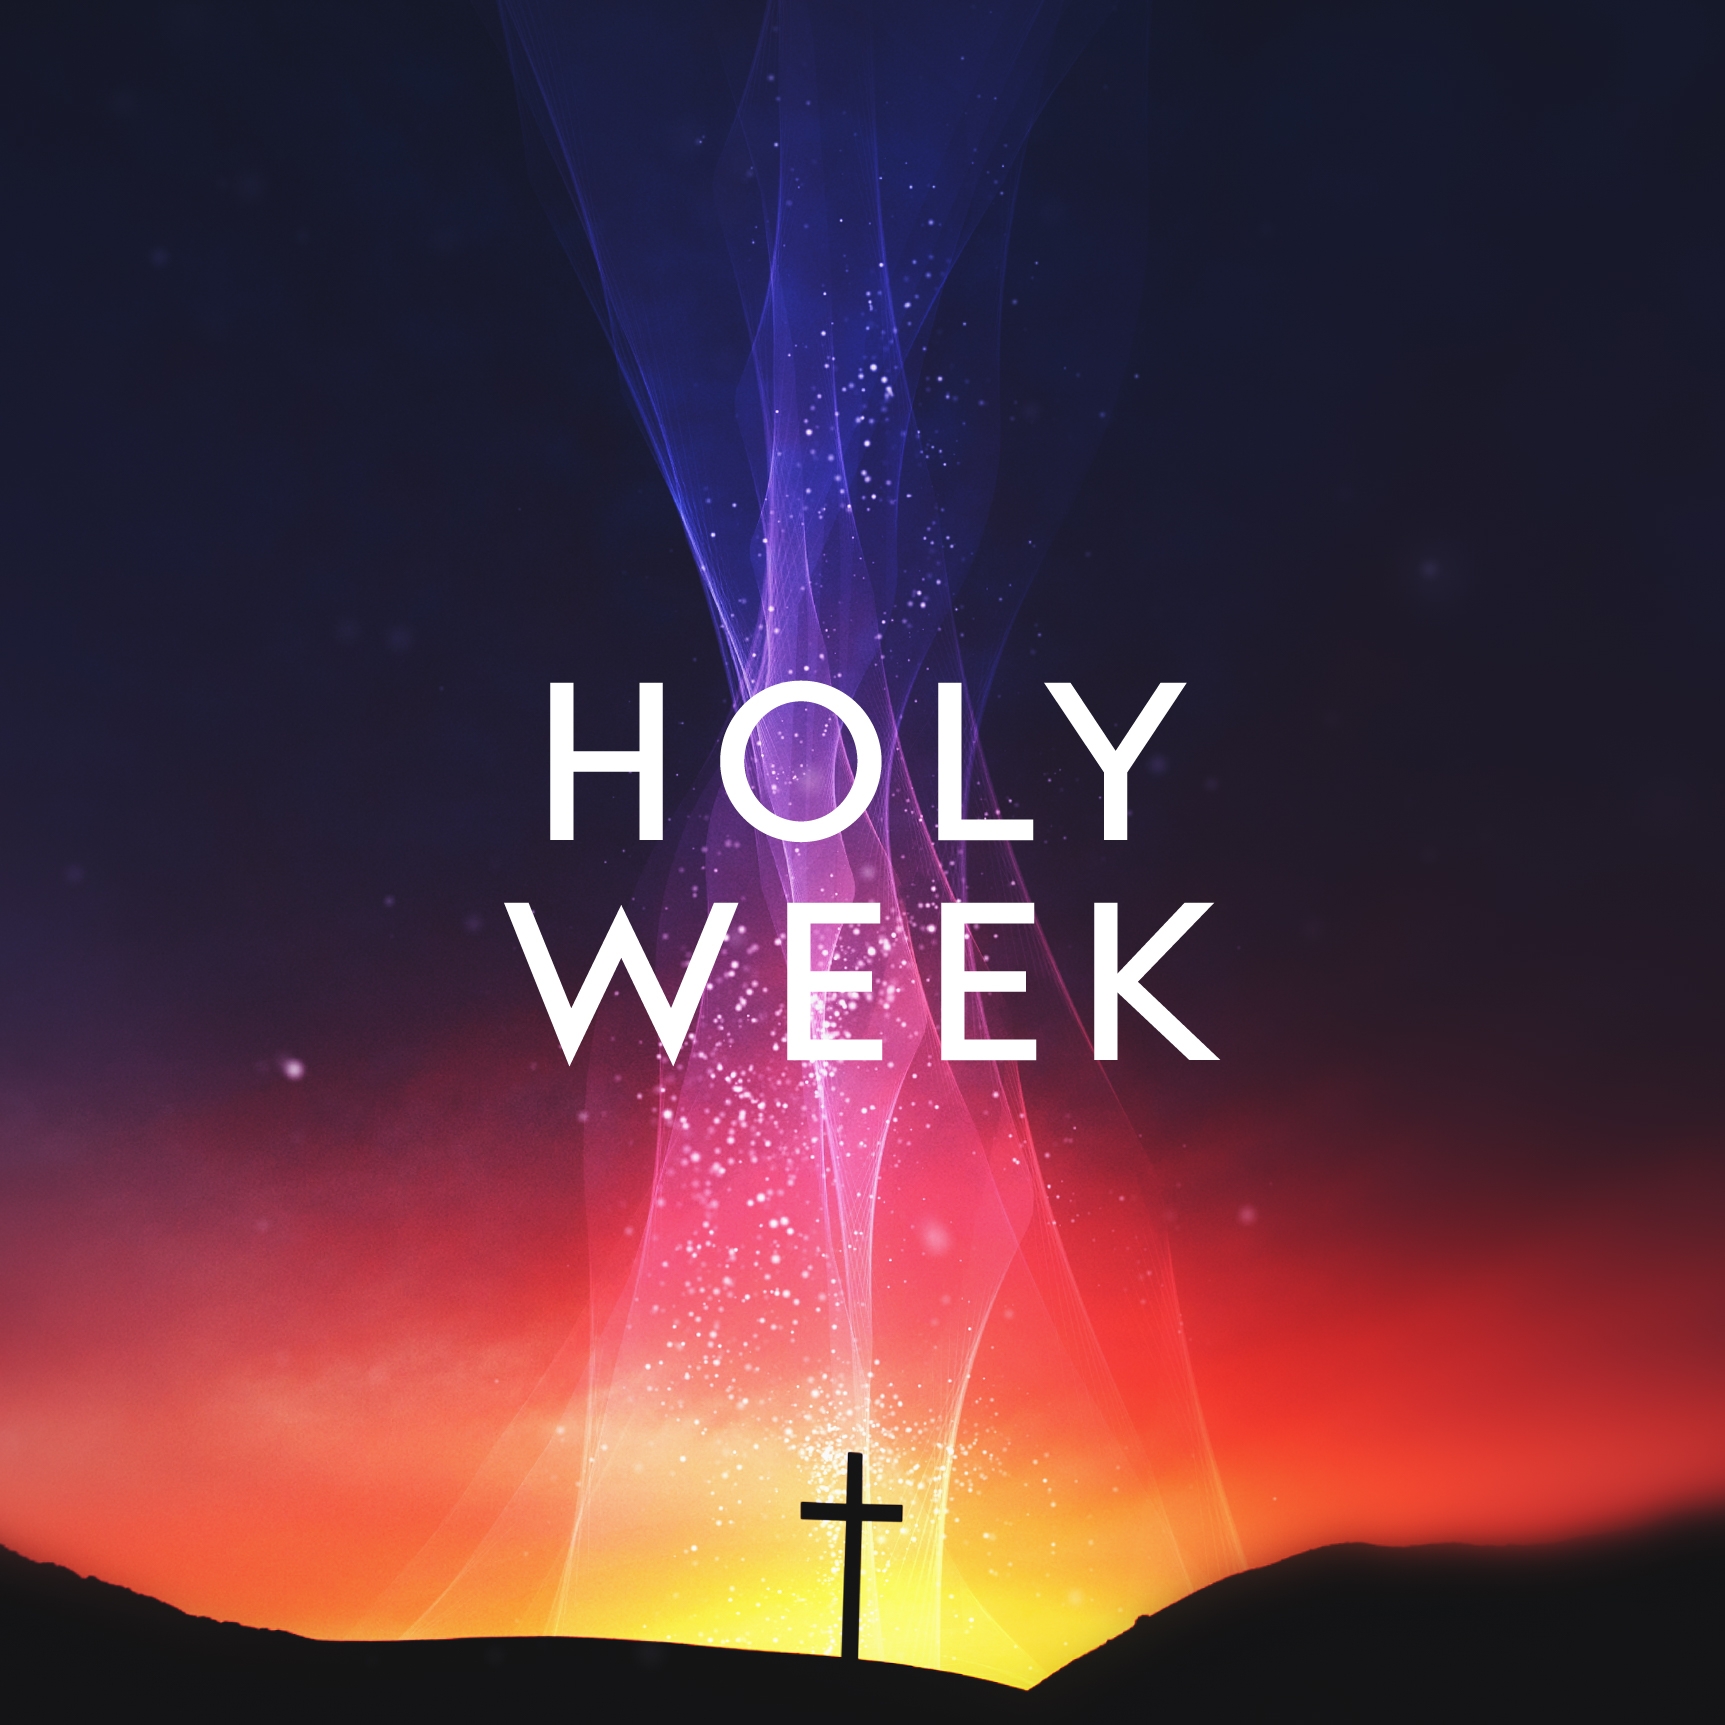 Join us for Holy Week & Easter Sunday